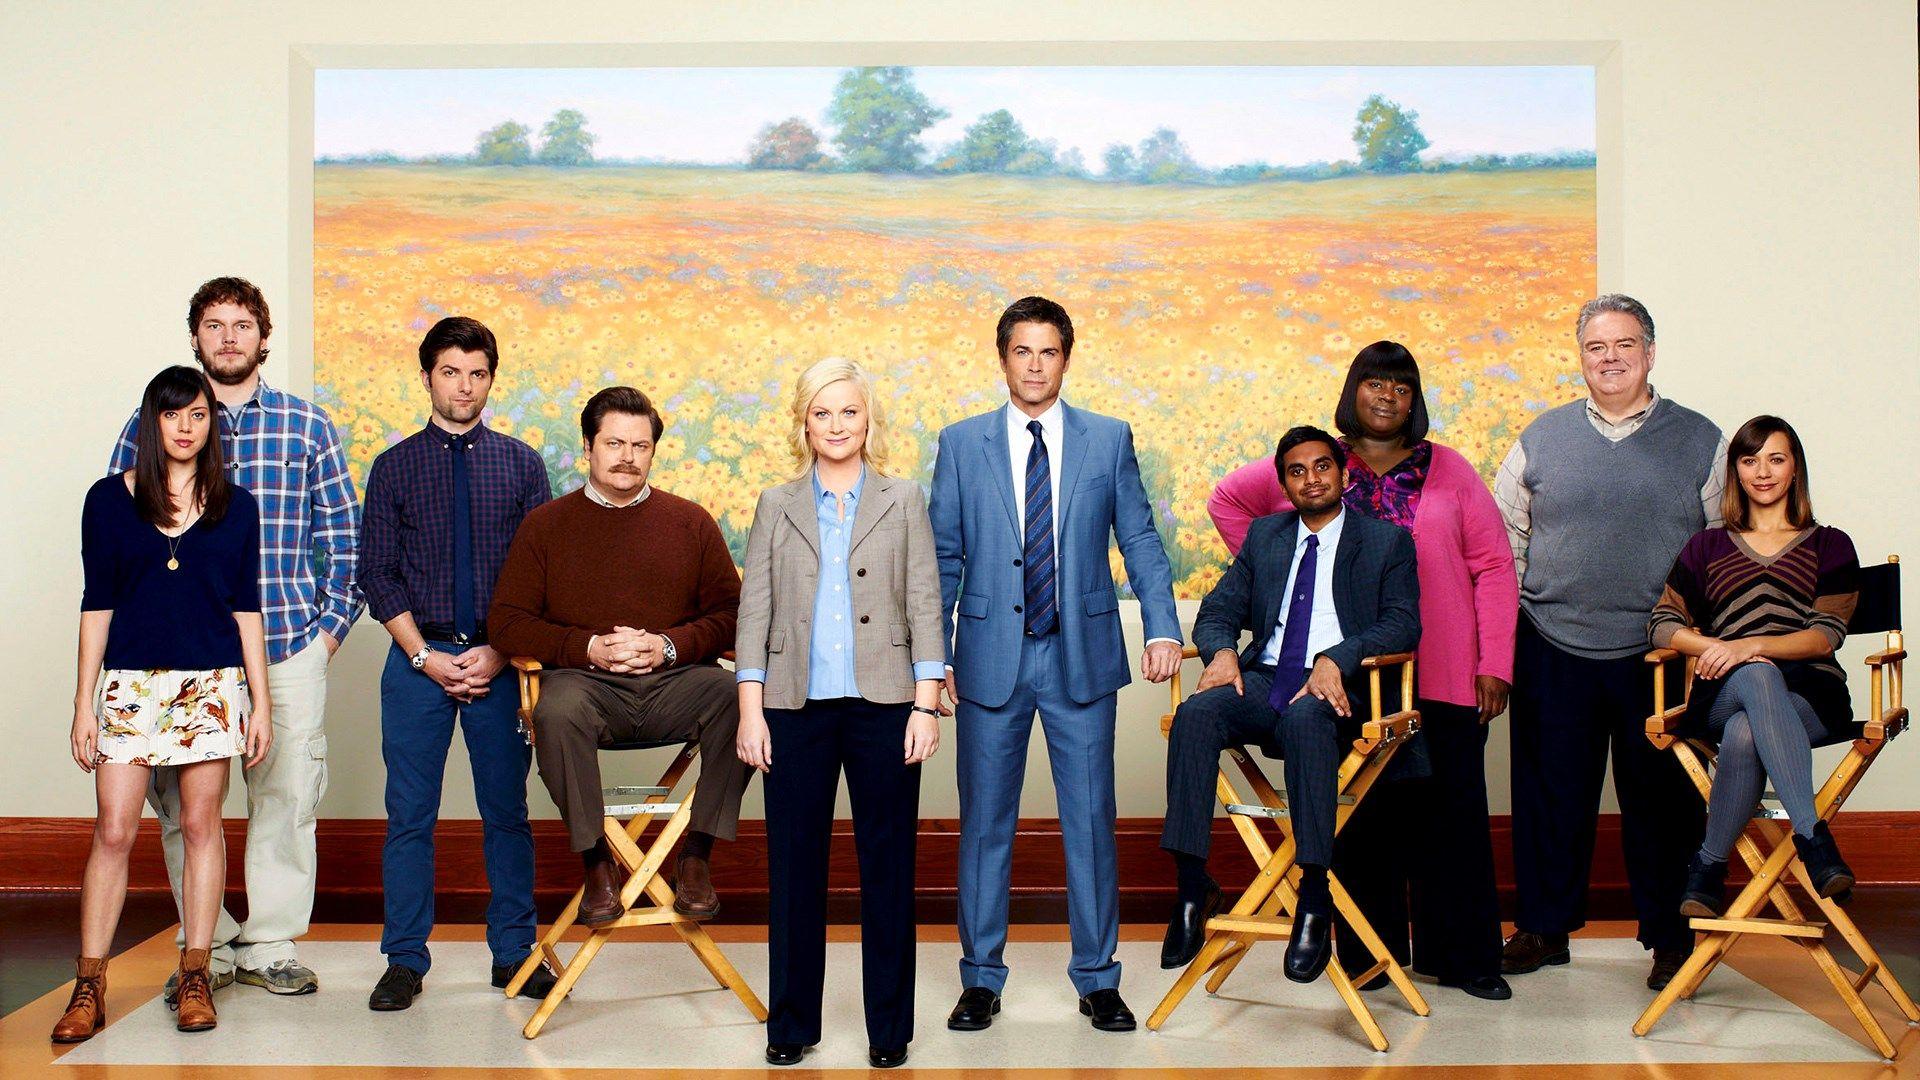 1920x1080 px free high resolution wallpapers parks and recreation